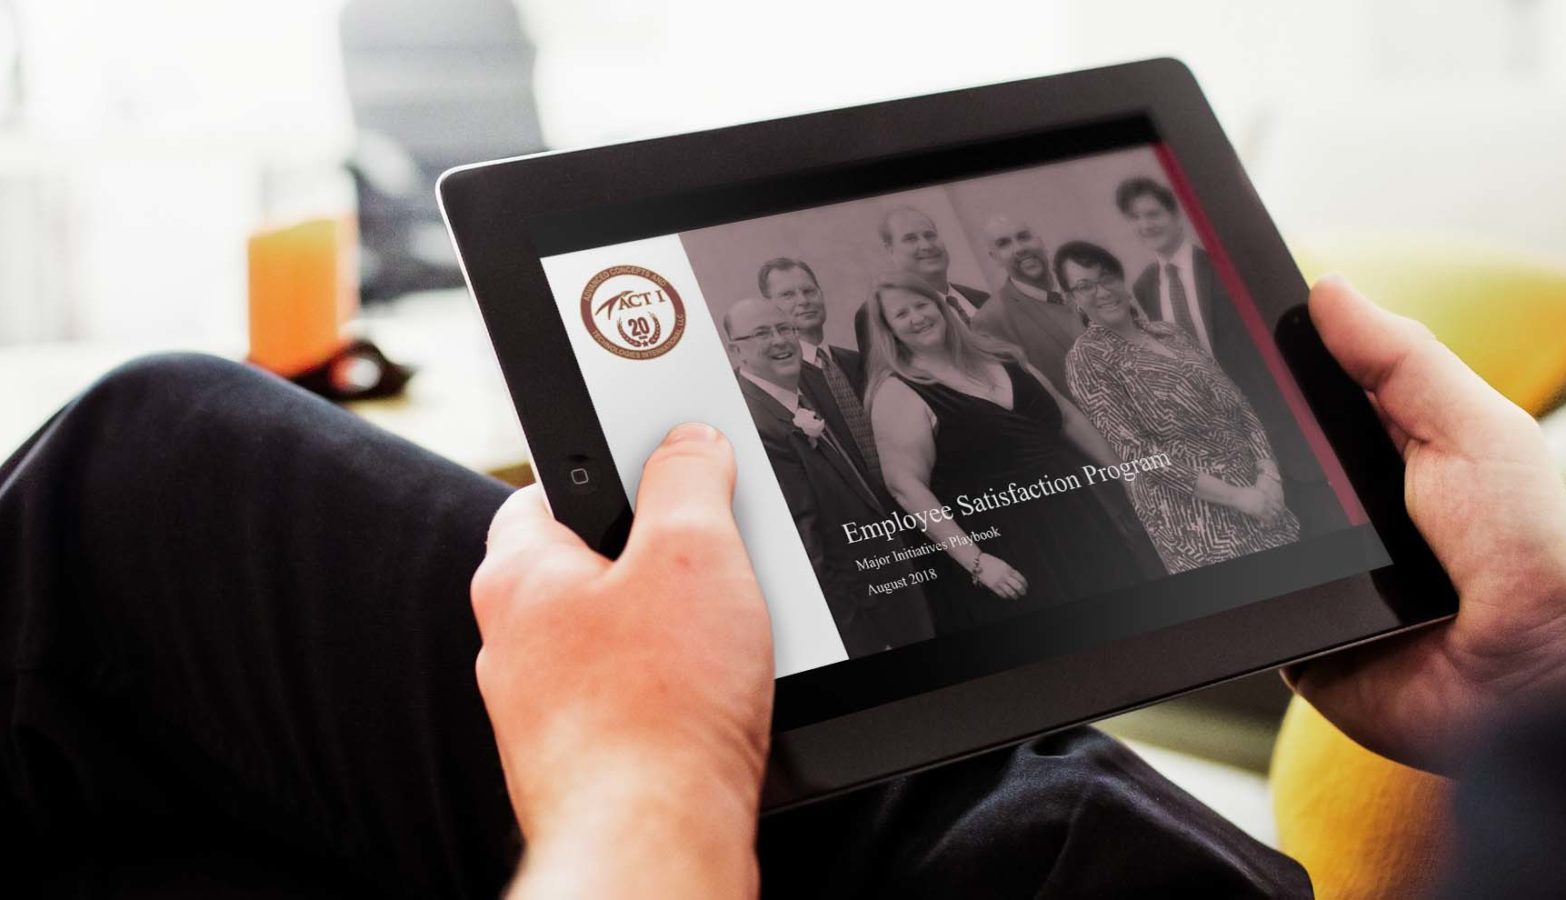 A person views an iPad with ACT I's Employee Satisfaction Program playbook on the screen